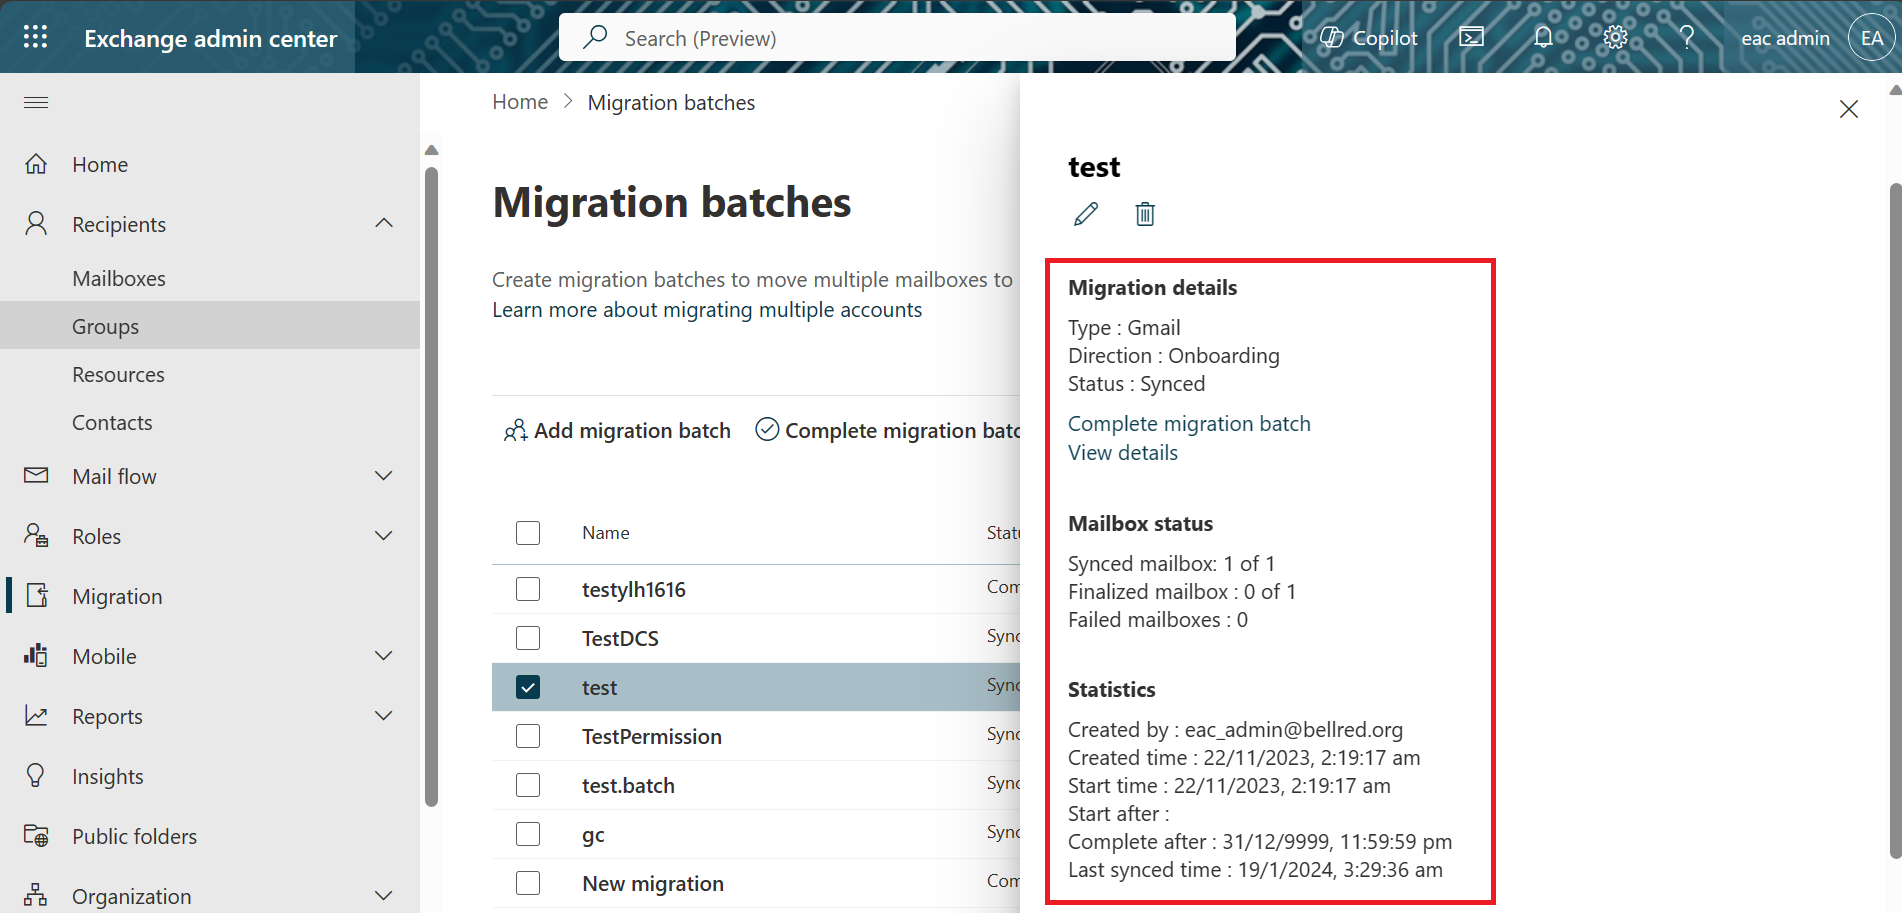 Screenshot of the Migration batches page on EAC with a batch selected and the property pane open that shows the migration details.